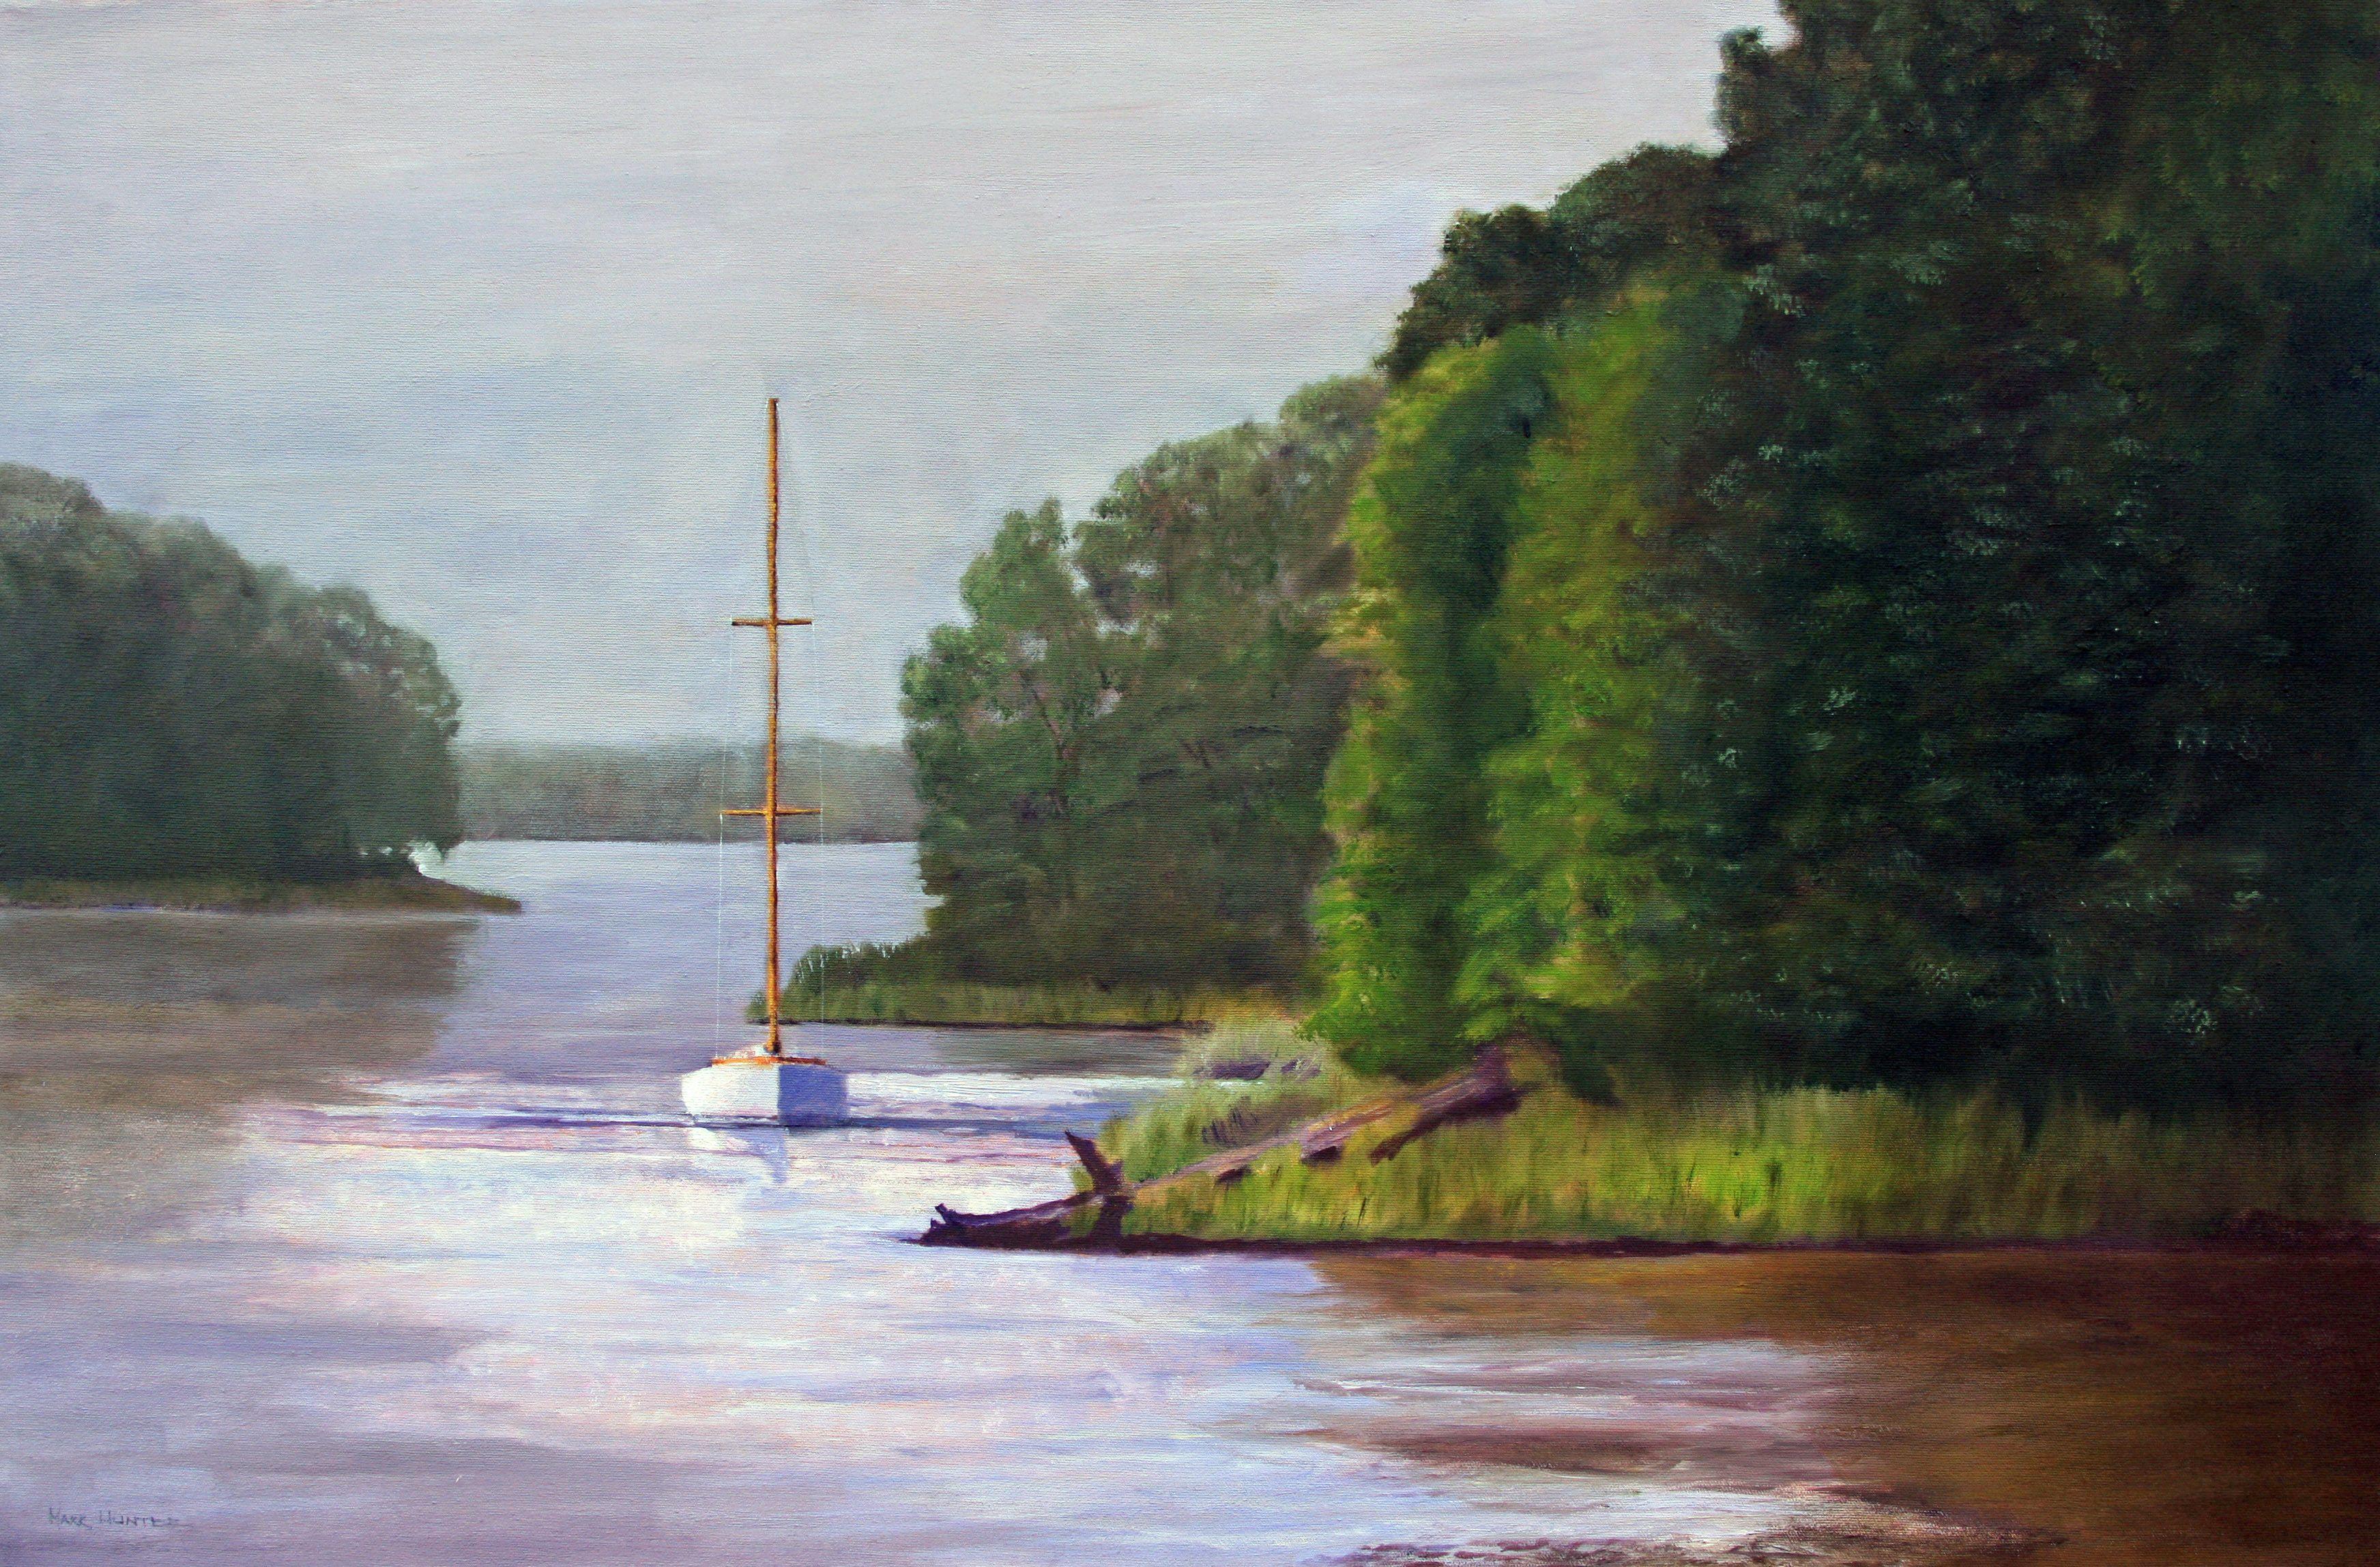 A favorite anchorage of mine off the Wye River on the Eastern Shore of the Chesapeake Bay. :: Painting :: Realism :: This piece comes with an official certificate of authenticity signed by the artist :: Ready to Hang: No :: Signed: Yes :: Signature